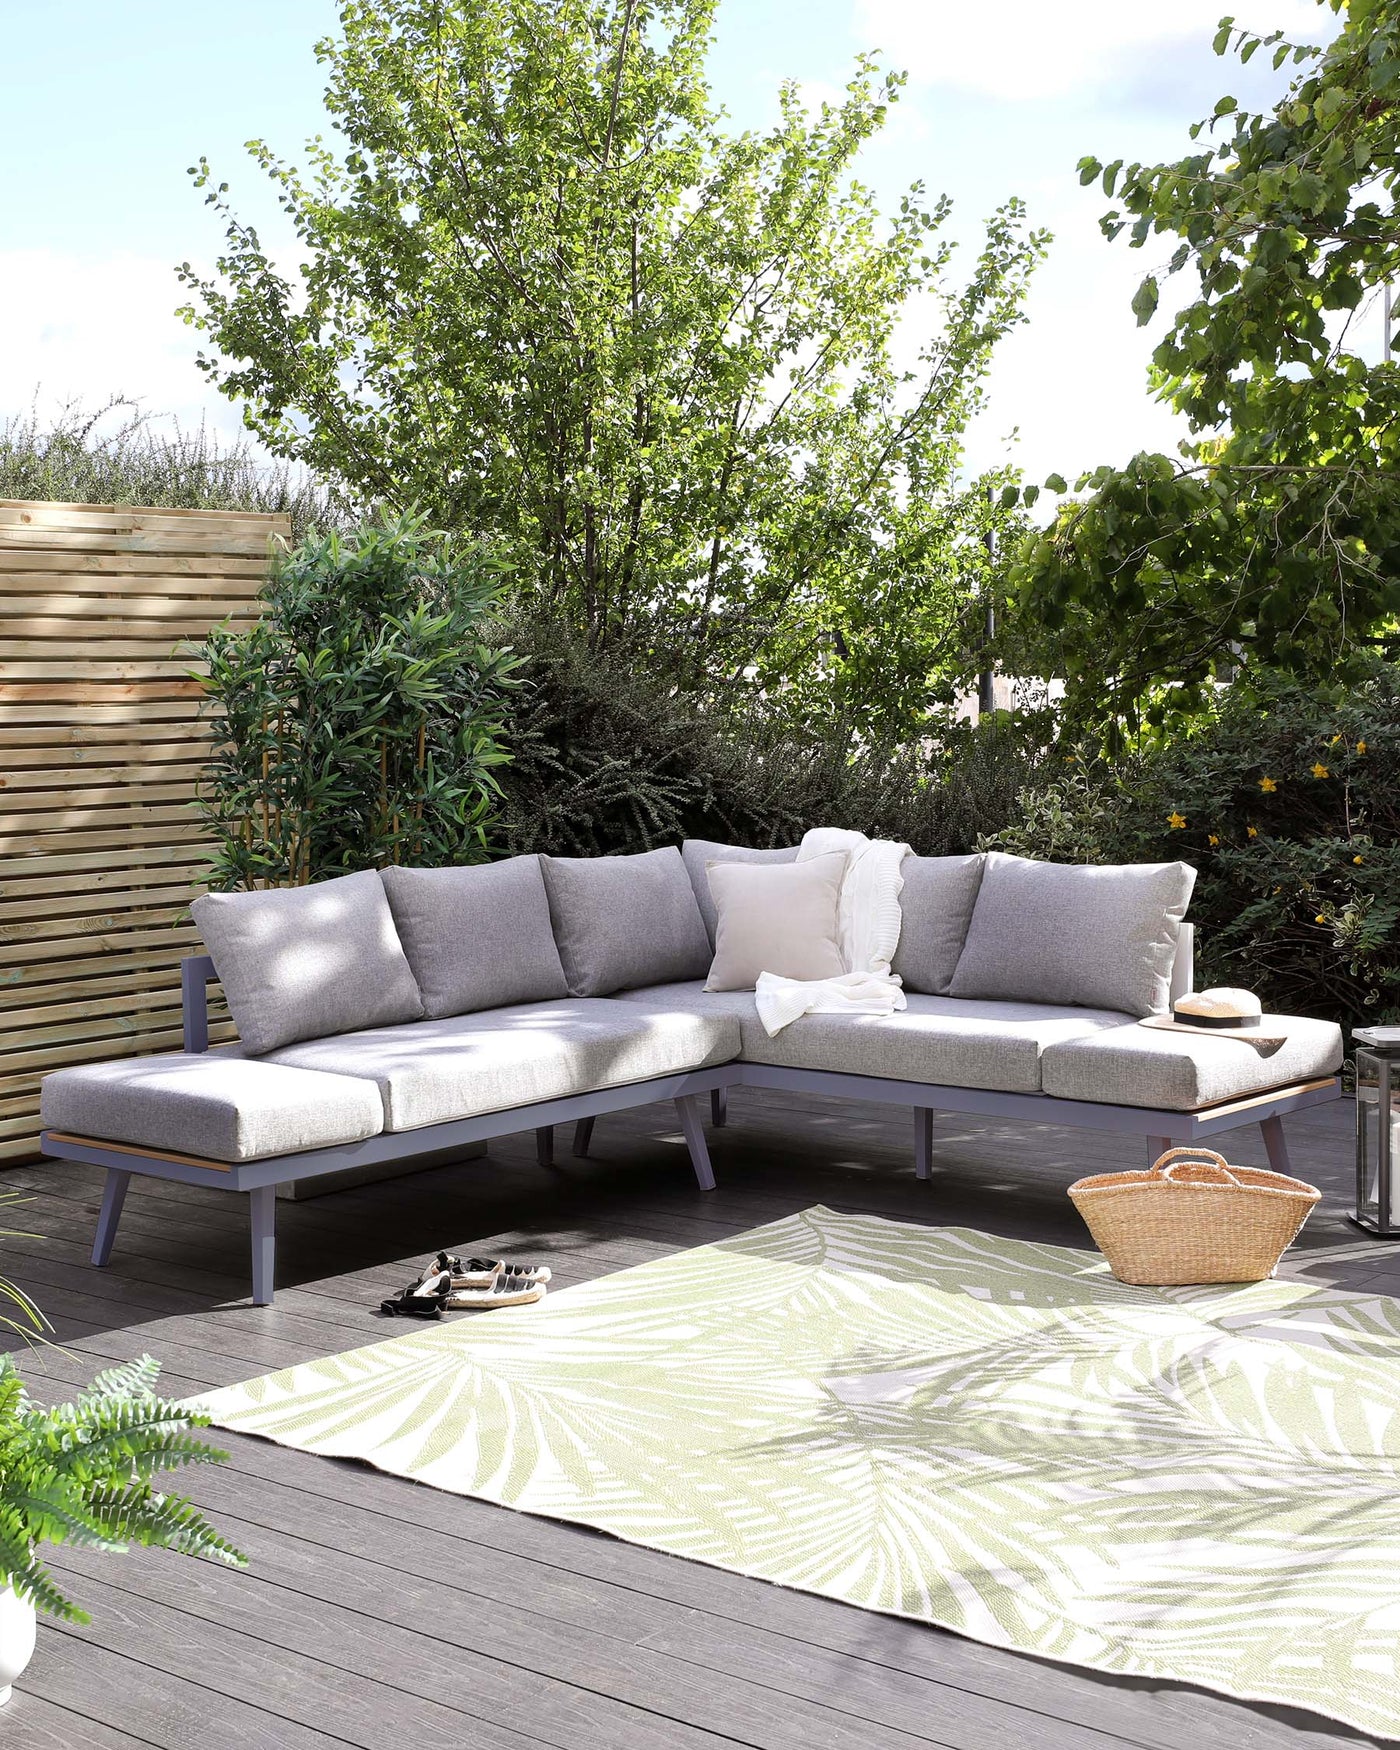 Modern outdoor L-shaped sectional sofa with light grey cushions, a chaise lounge on the right side, and a metal frame in a dark finish set on a wooden deck with decorative outdoor pillows, accompanied by a small metal side table. A patterned light green and white area rug lies beneath the arrangement, enhancing the outdoor setting.